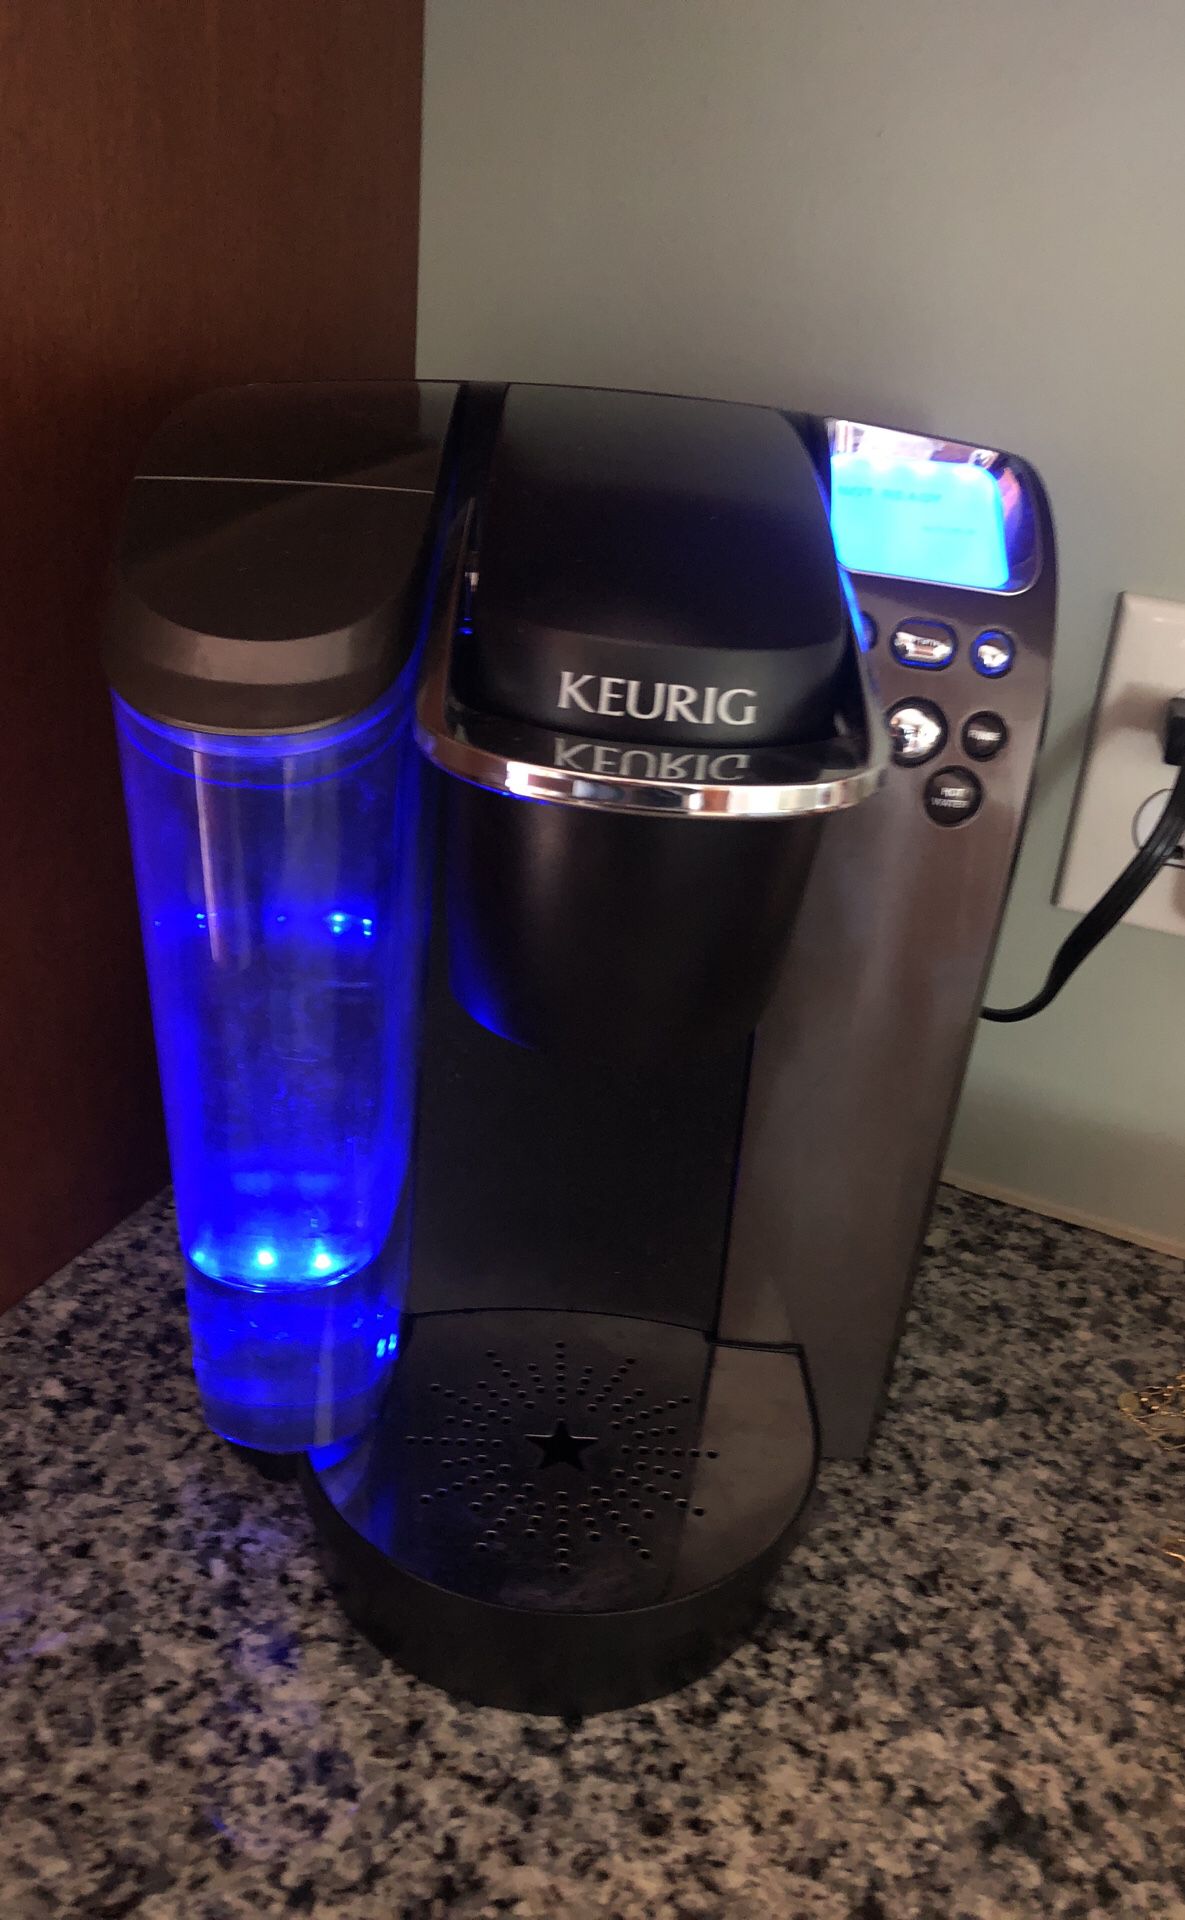 Keurig in great condition